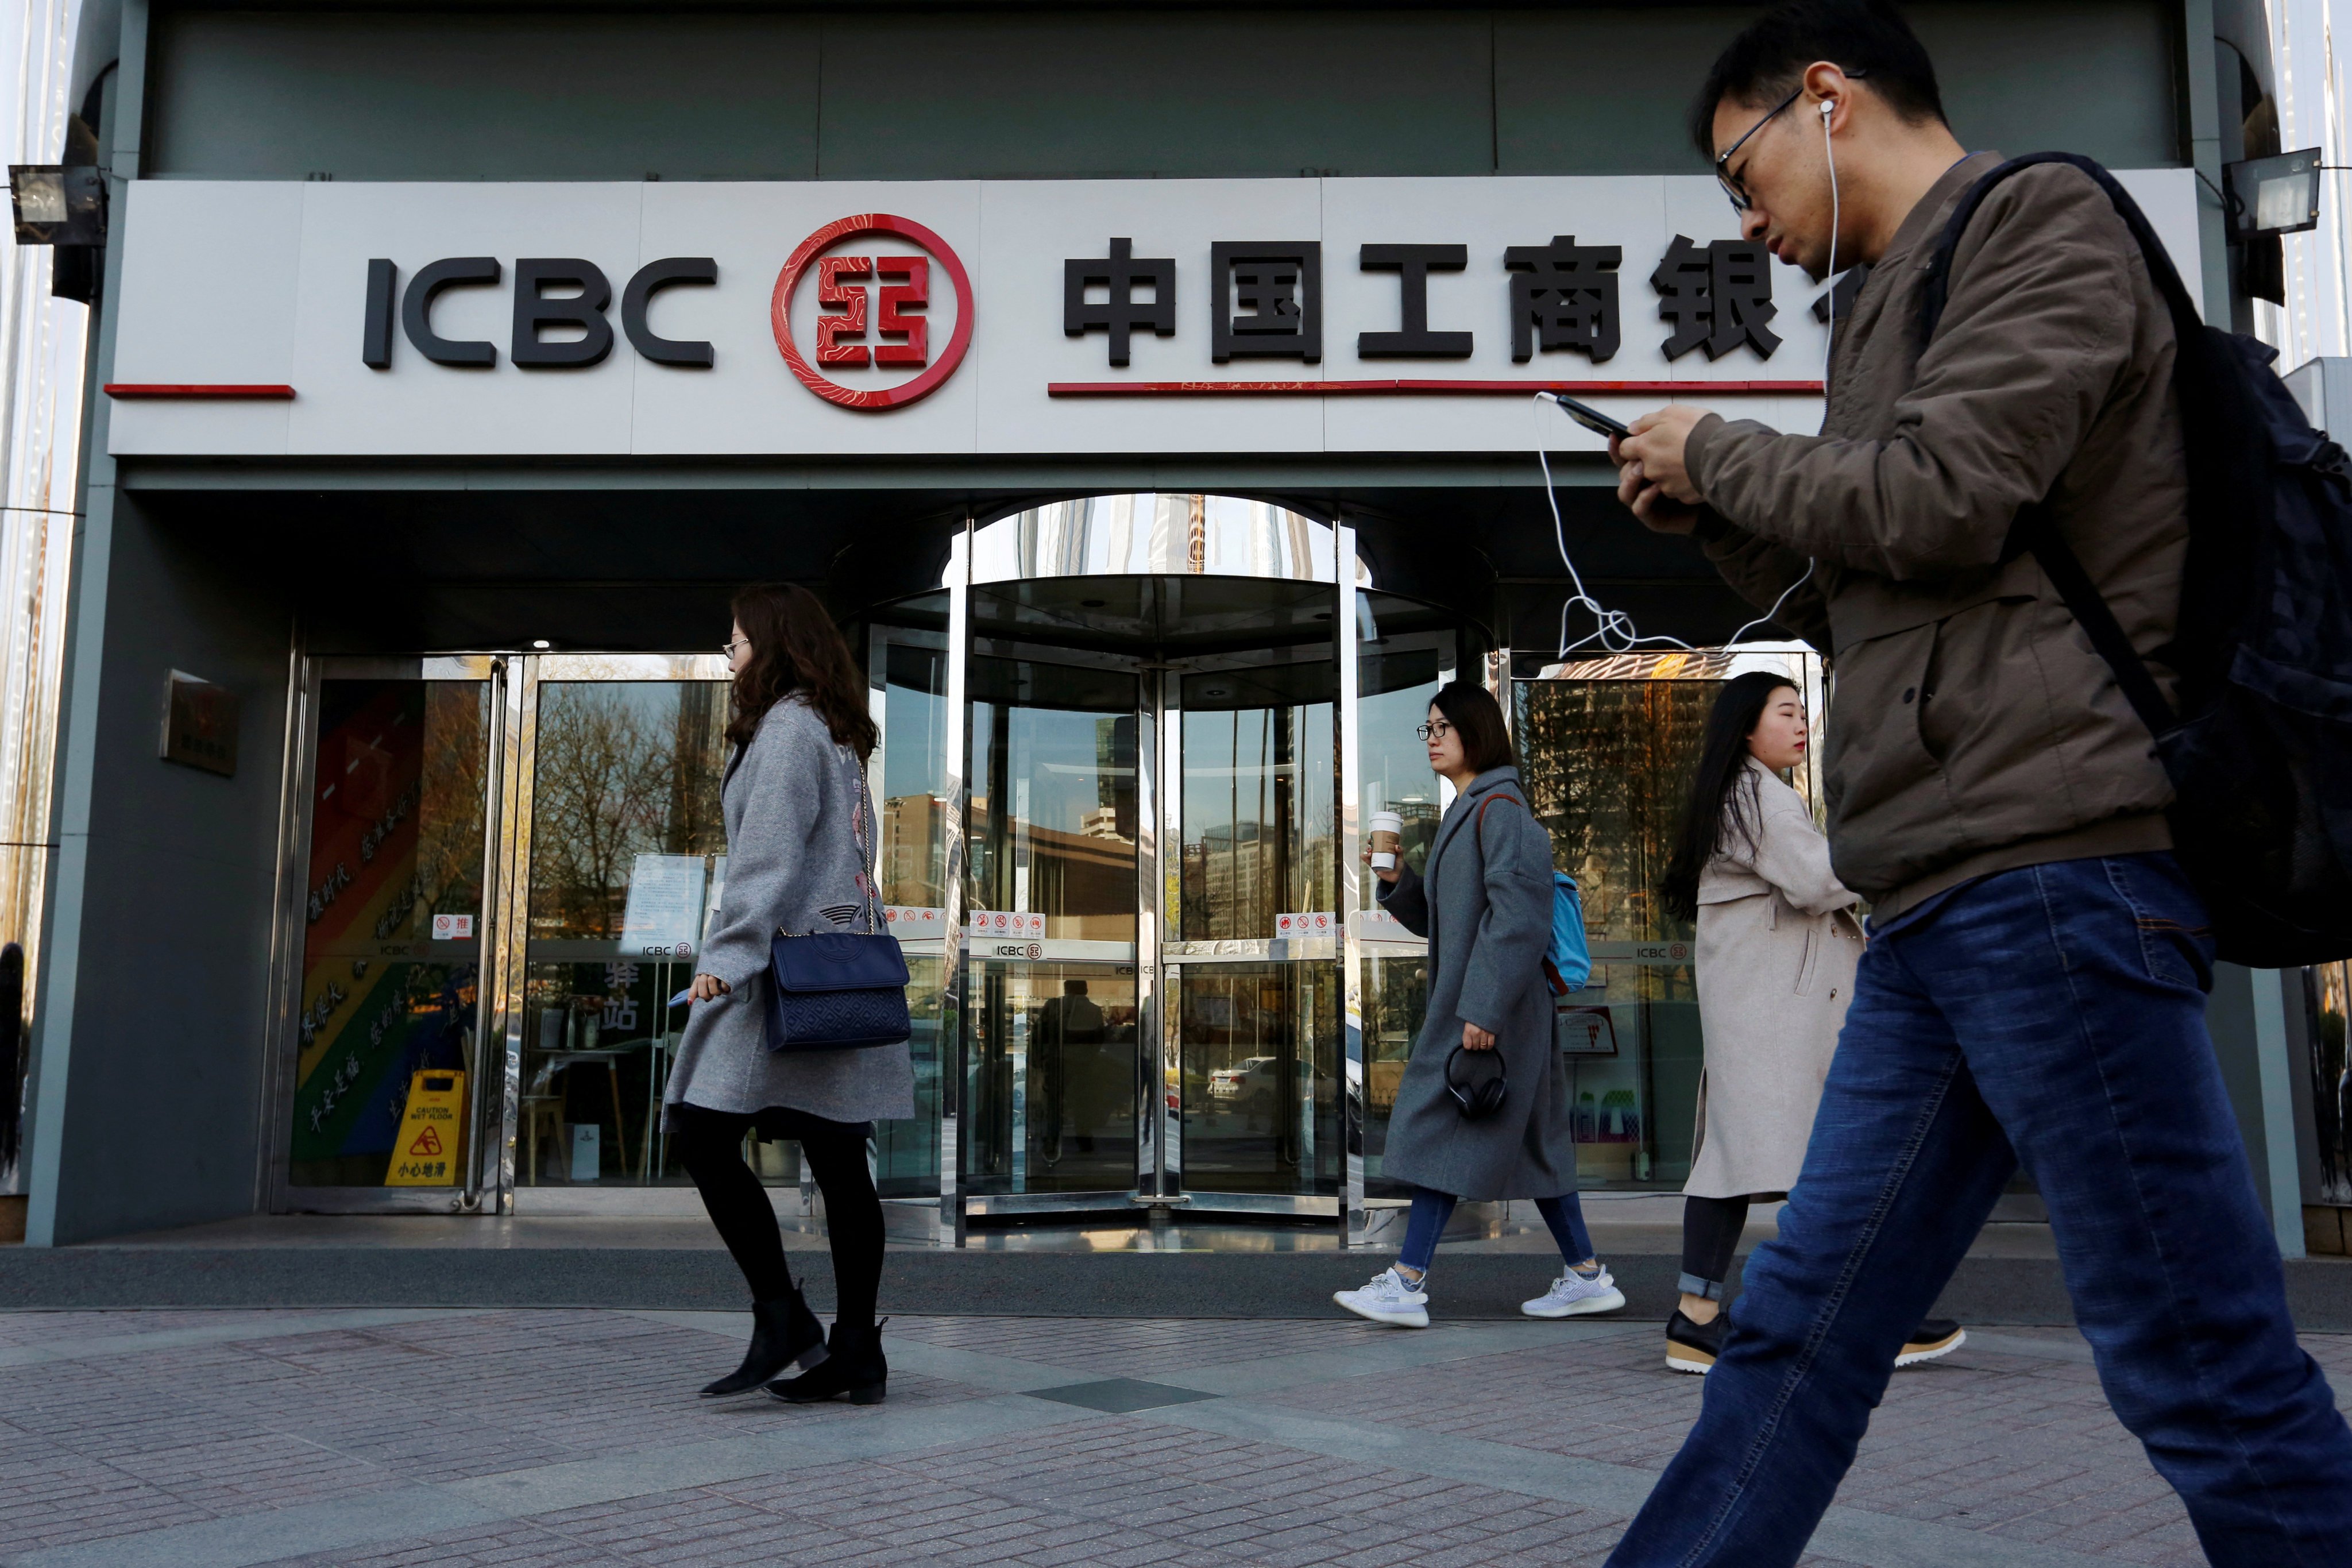 China’s top banks including ICBC are planning to sell at least 40 billion yuan worth of bonds to comply with global rules. Photo: Reuters